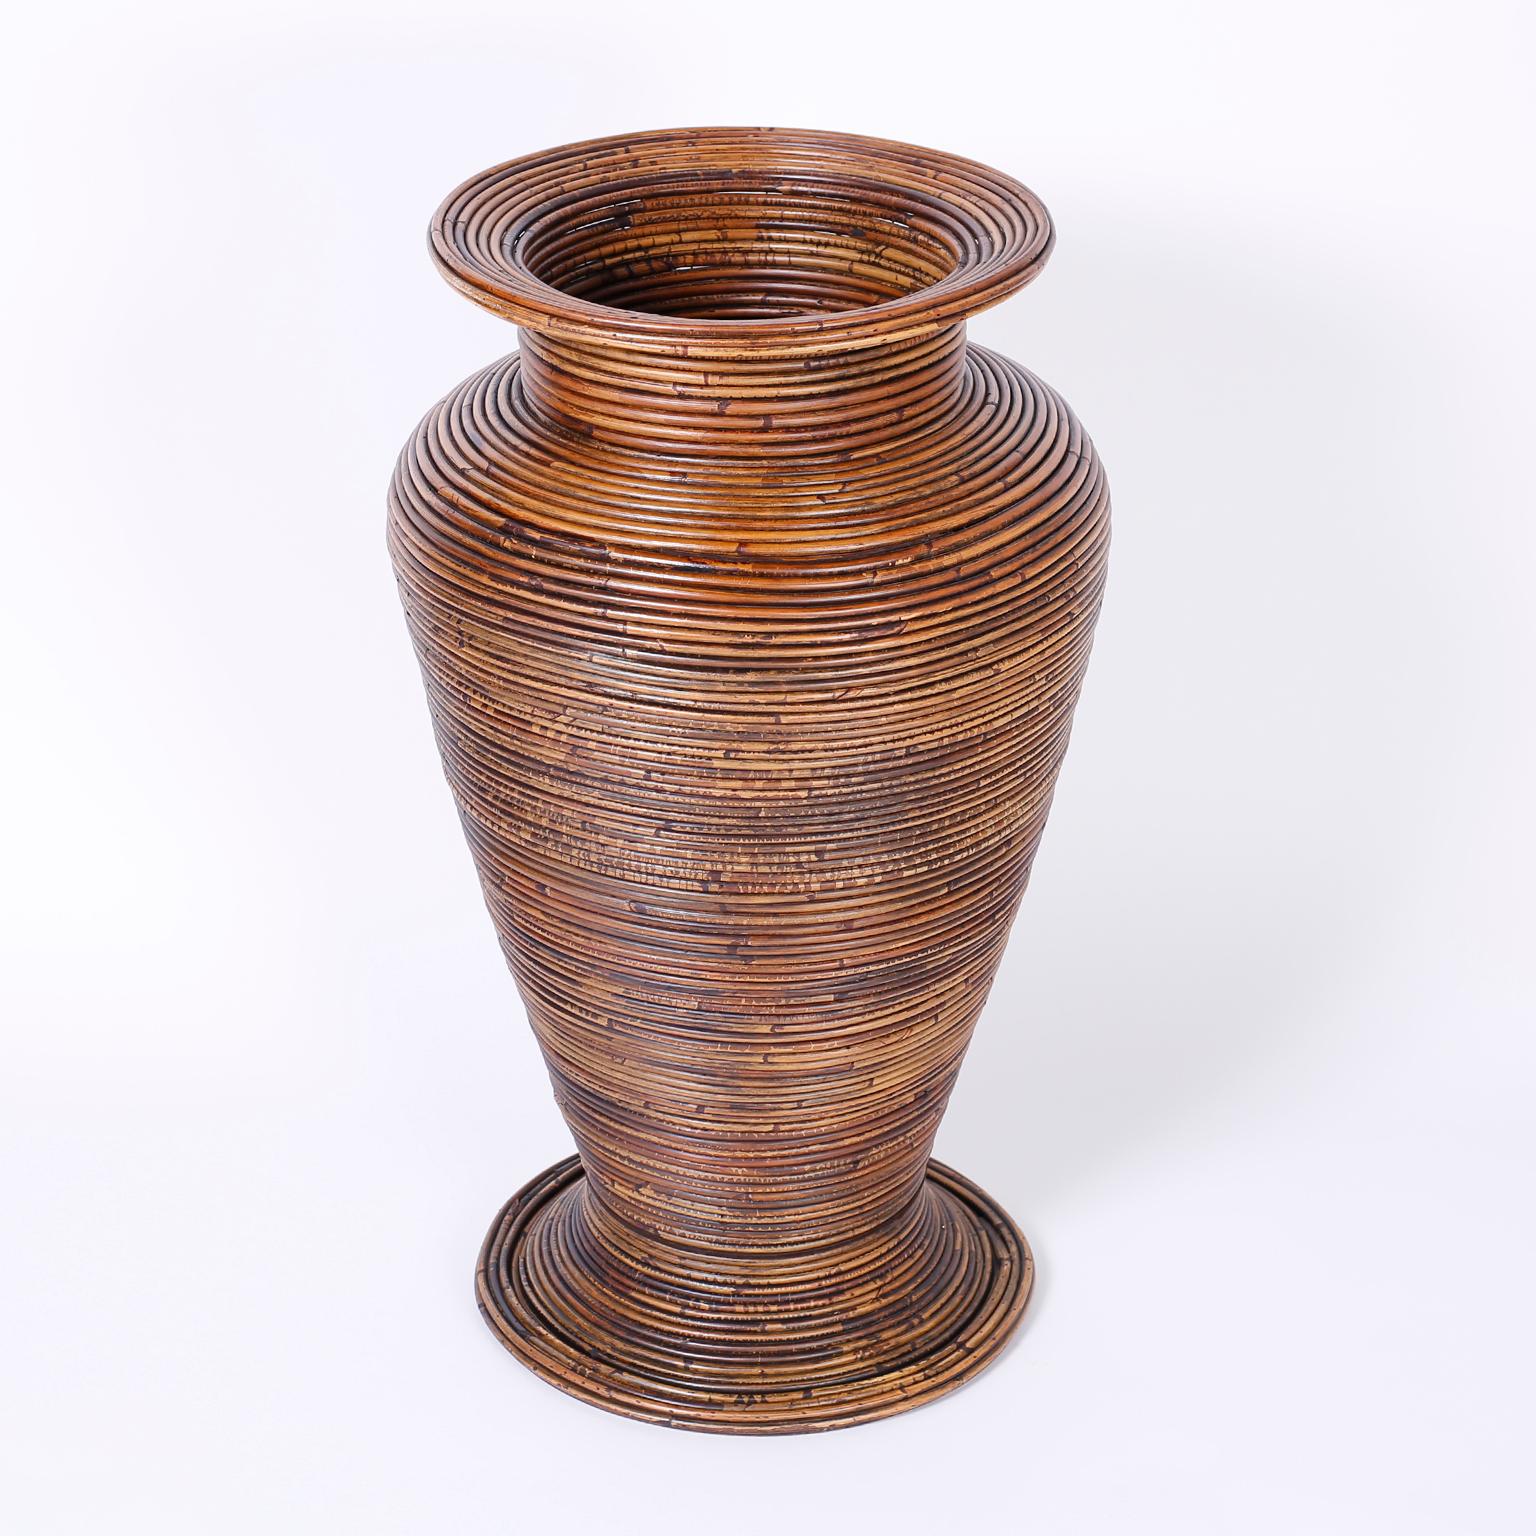 Midcentury floor vase crafted in pencil reed with a Classic form and warm lush finish.